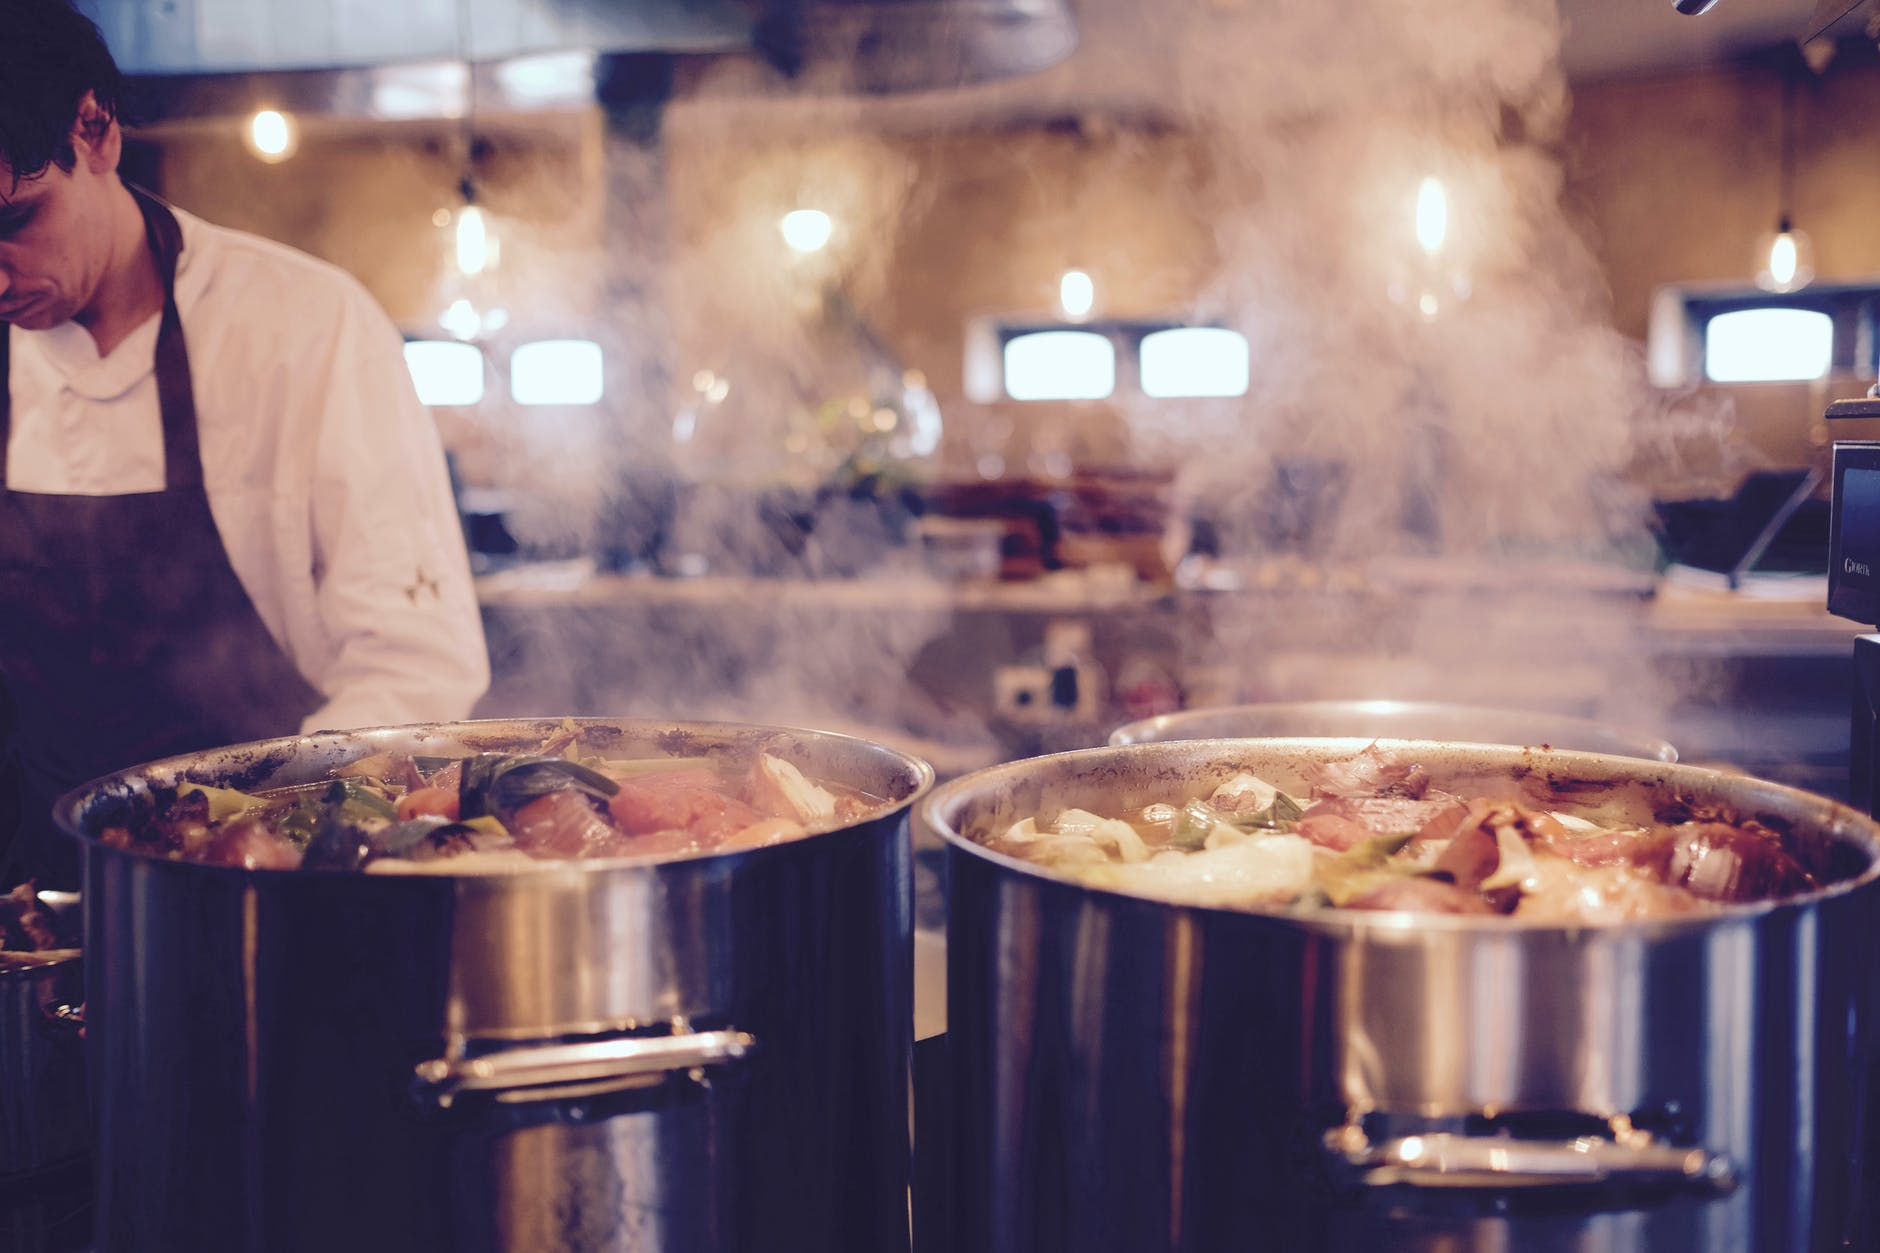 Prolonged exposure to smoke from indoor cooking can be harmful to restaurant staff